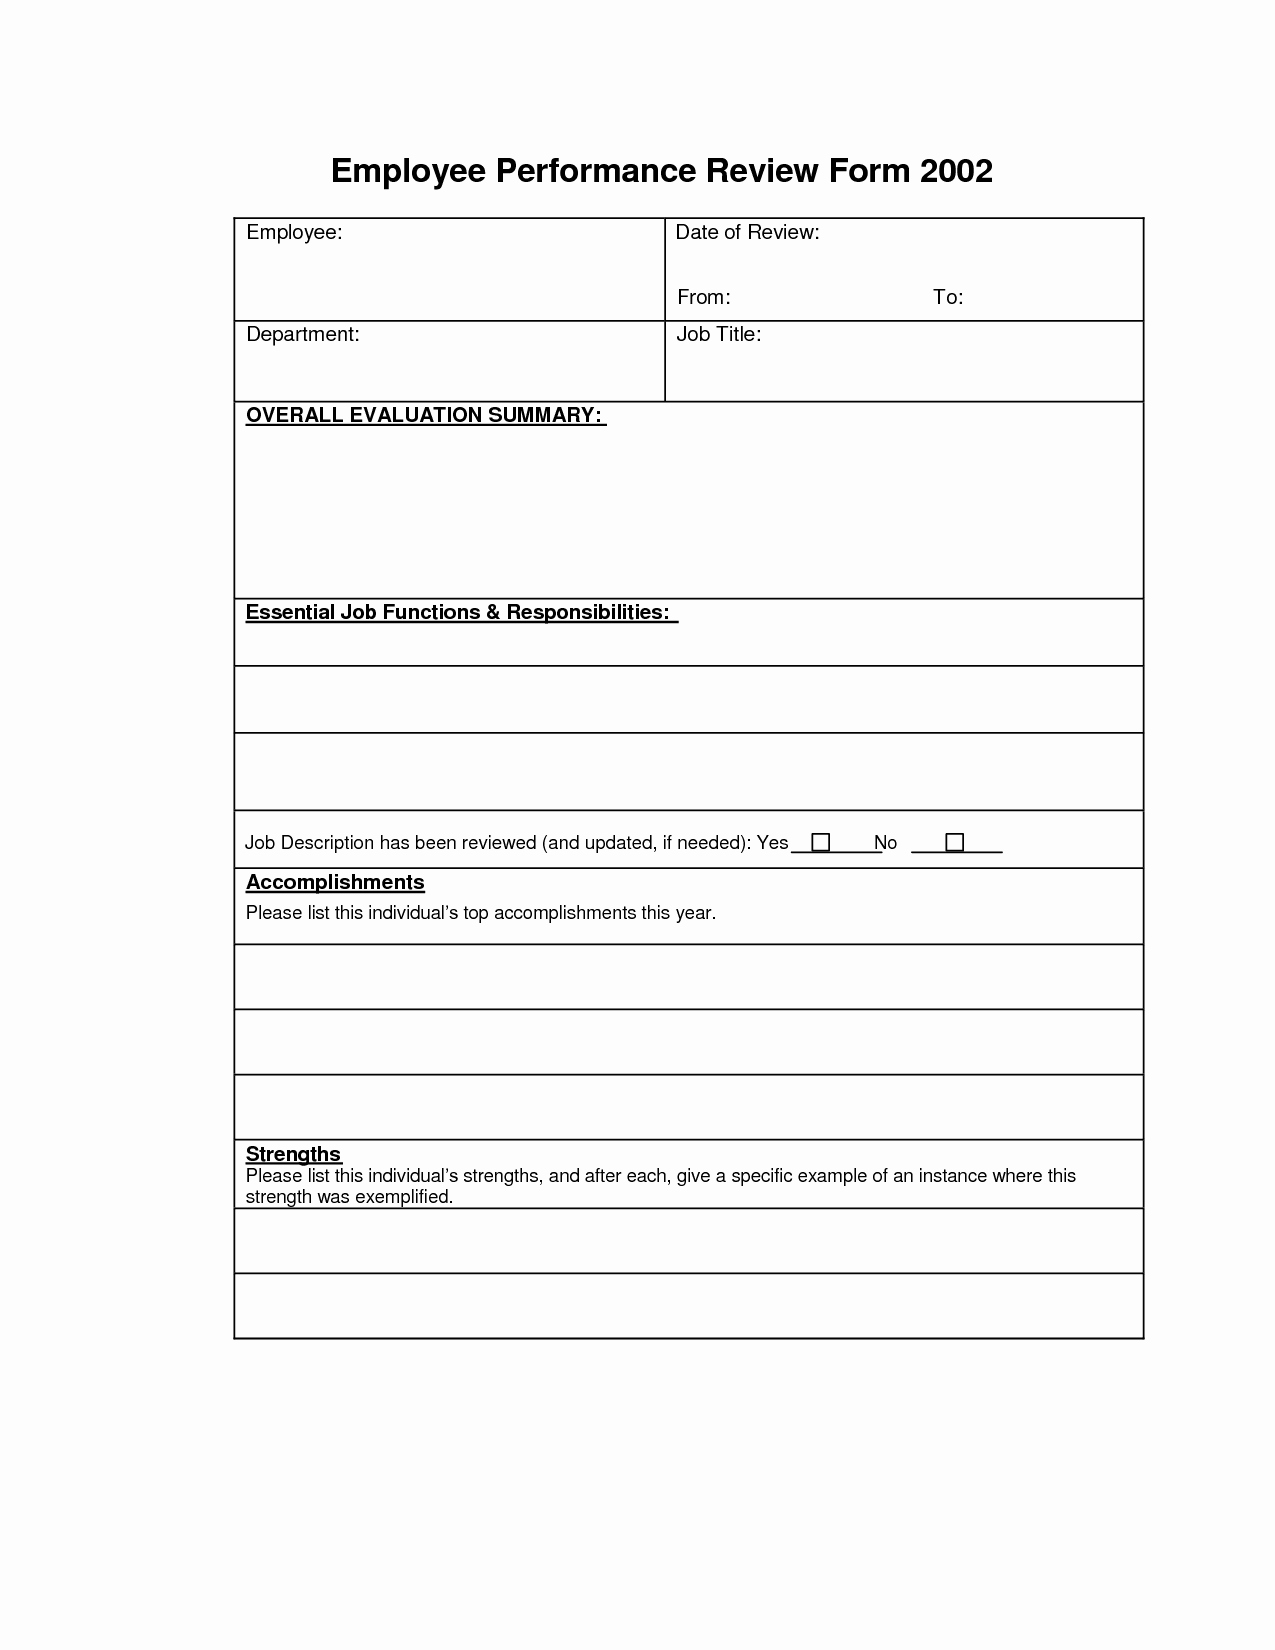 Free Employee Evaluation forms Templates Lovely Employee Performance Review form Free Picture